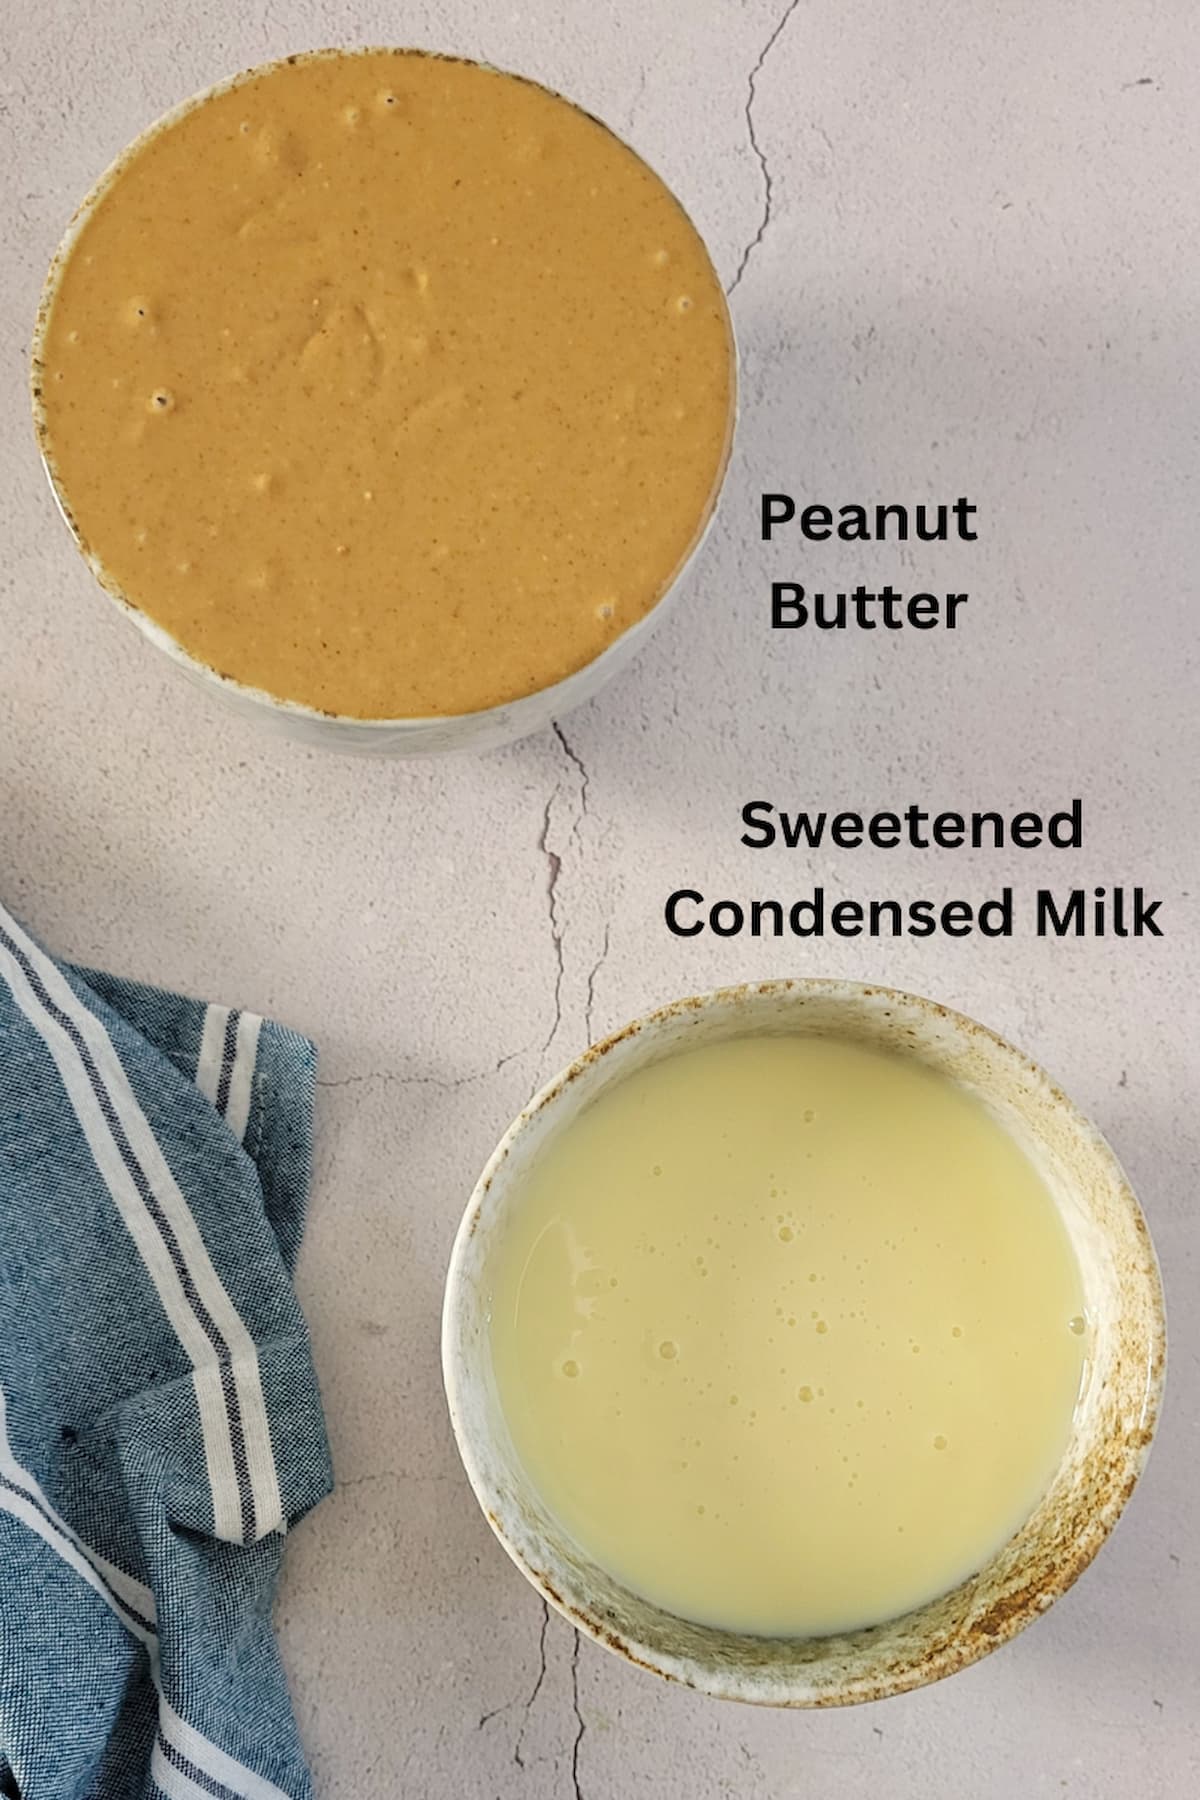 ingredients for recipe for peanut butter fudge easy - peanut butter and sweetened condensed milk